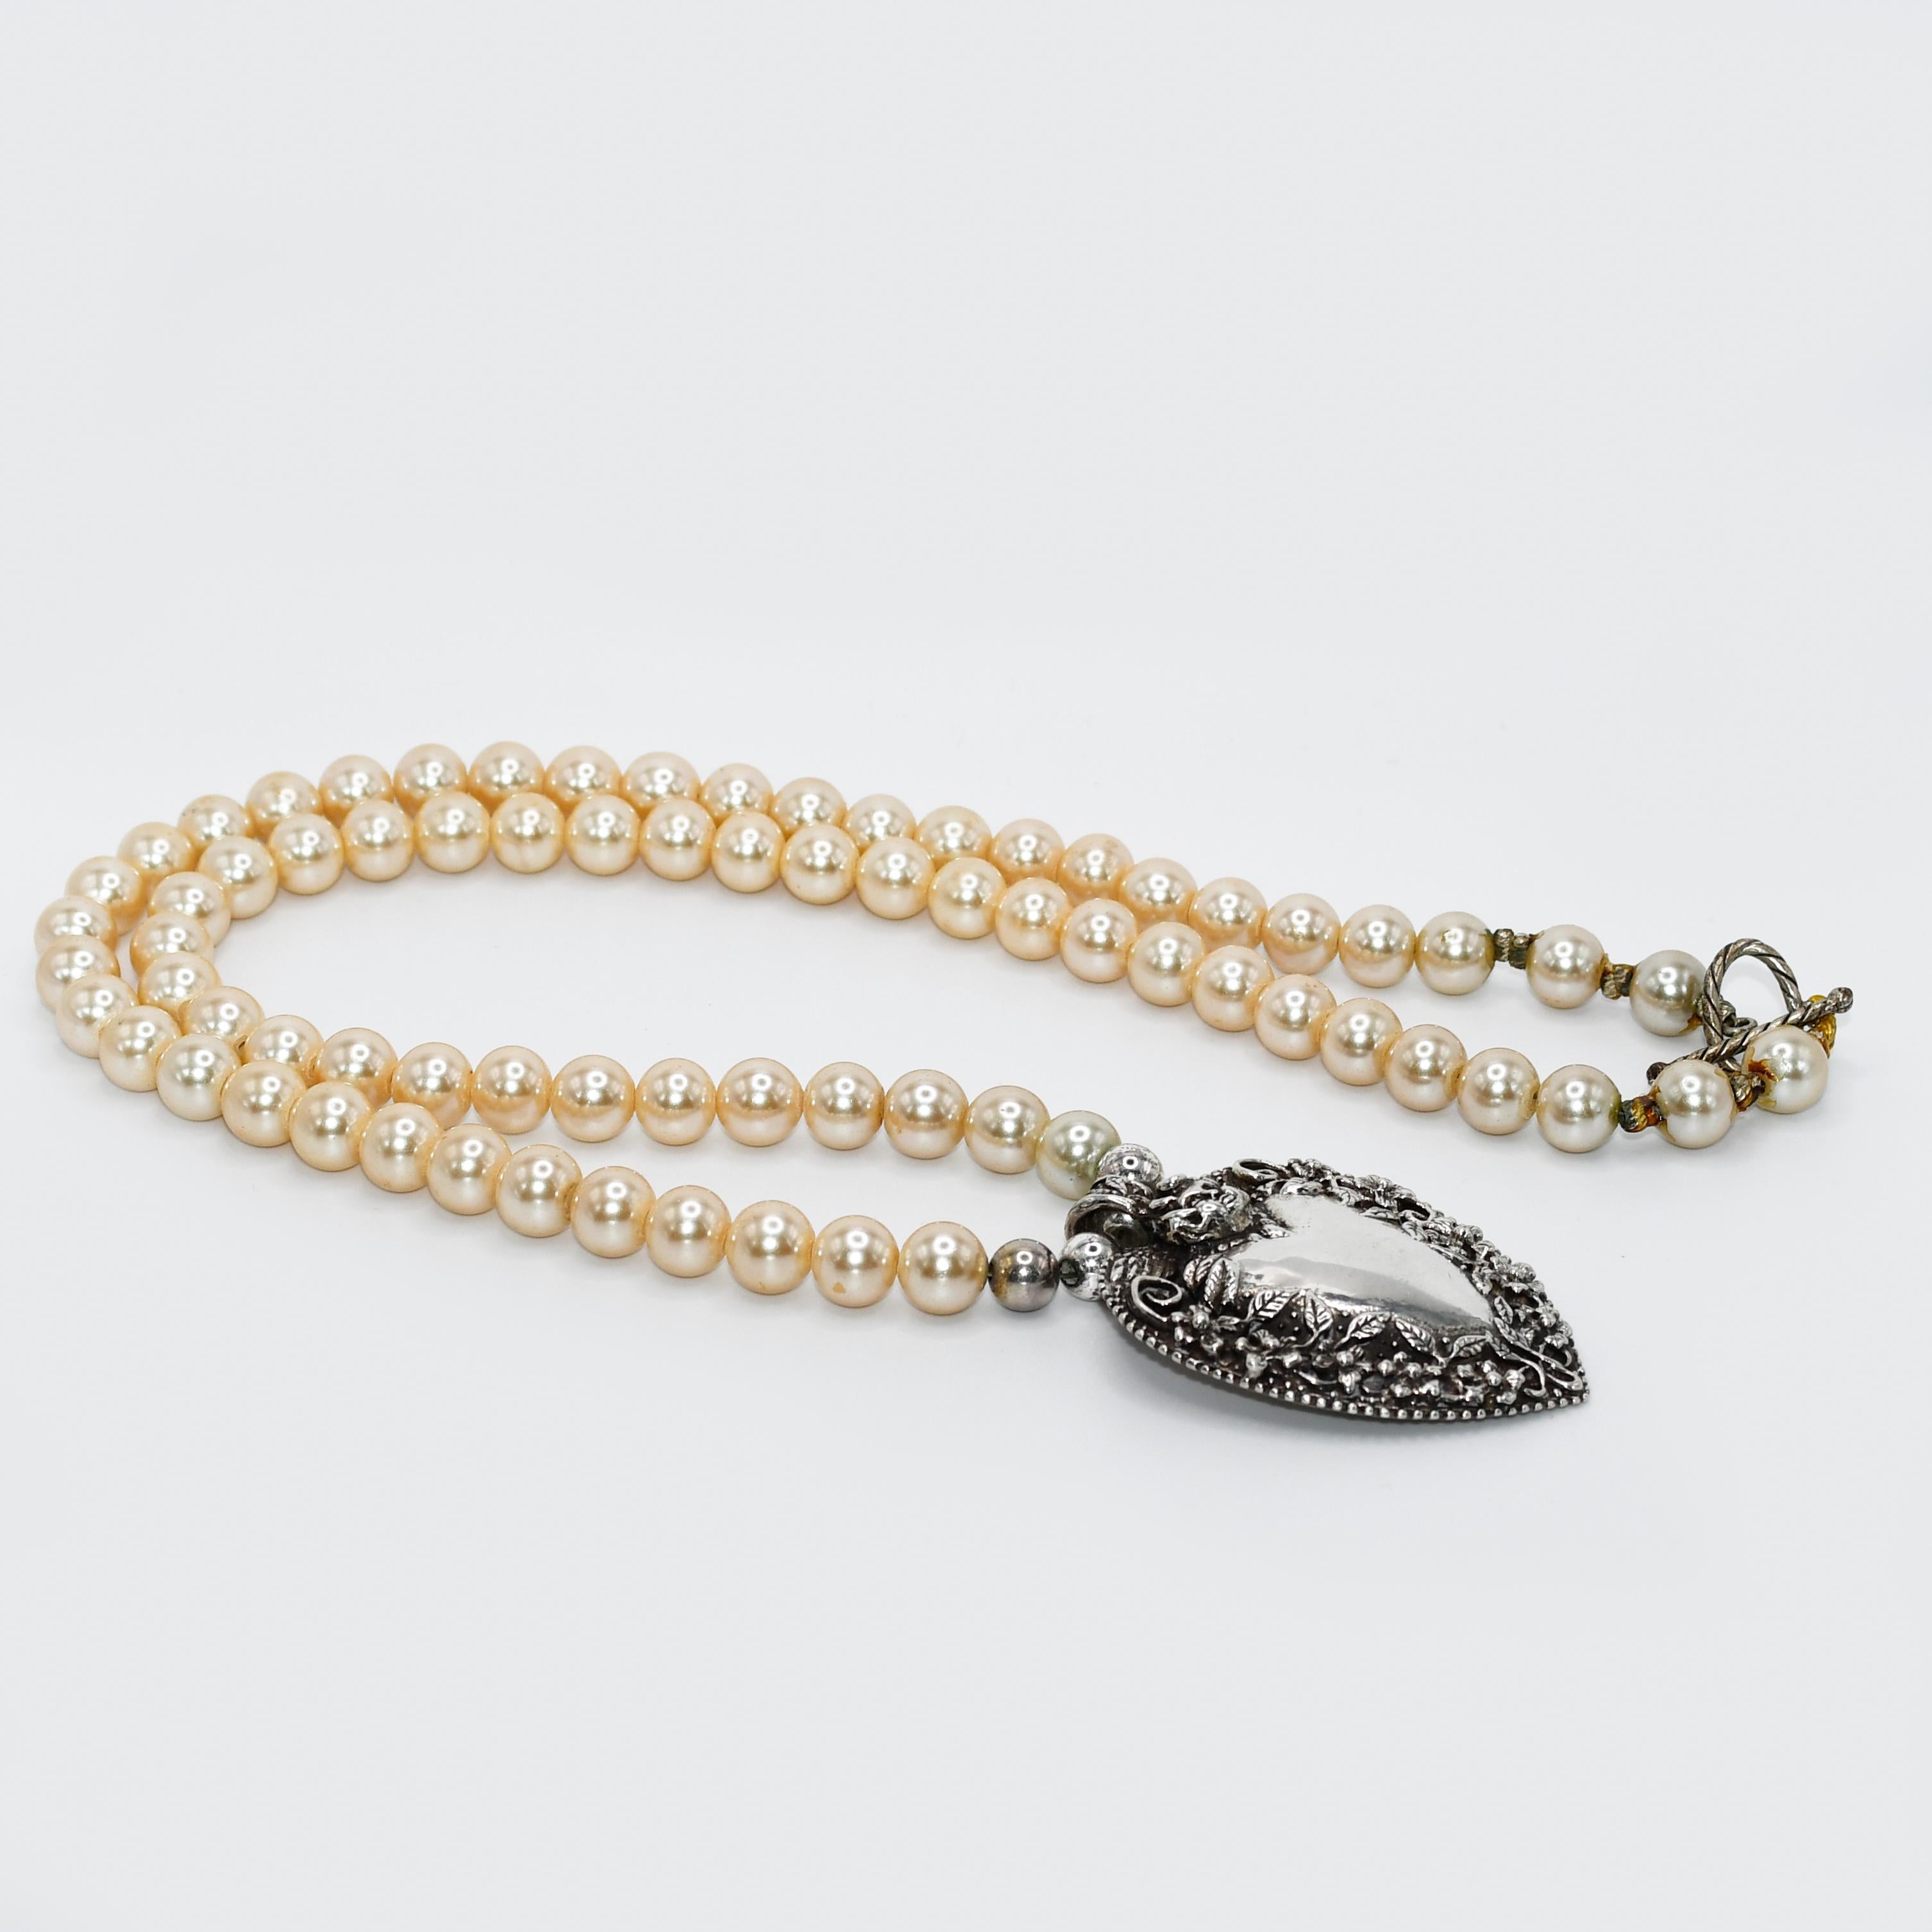 Sterling Heart Pendant, Faux Pearl Necklace, 158g
Designer silver and faux pearl necklace by Andrea Barnett.
The silver heart pendant is stamped .925 Andrea Barnett.
The sterling silver heart weighs 54 grams and measures 2 1/2 by 1 3/4 inches.
The